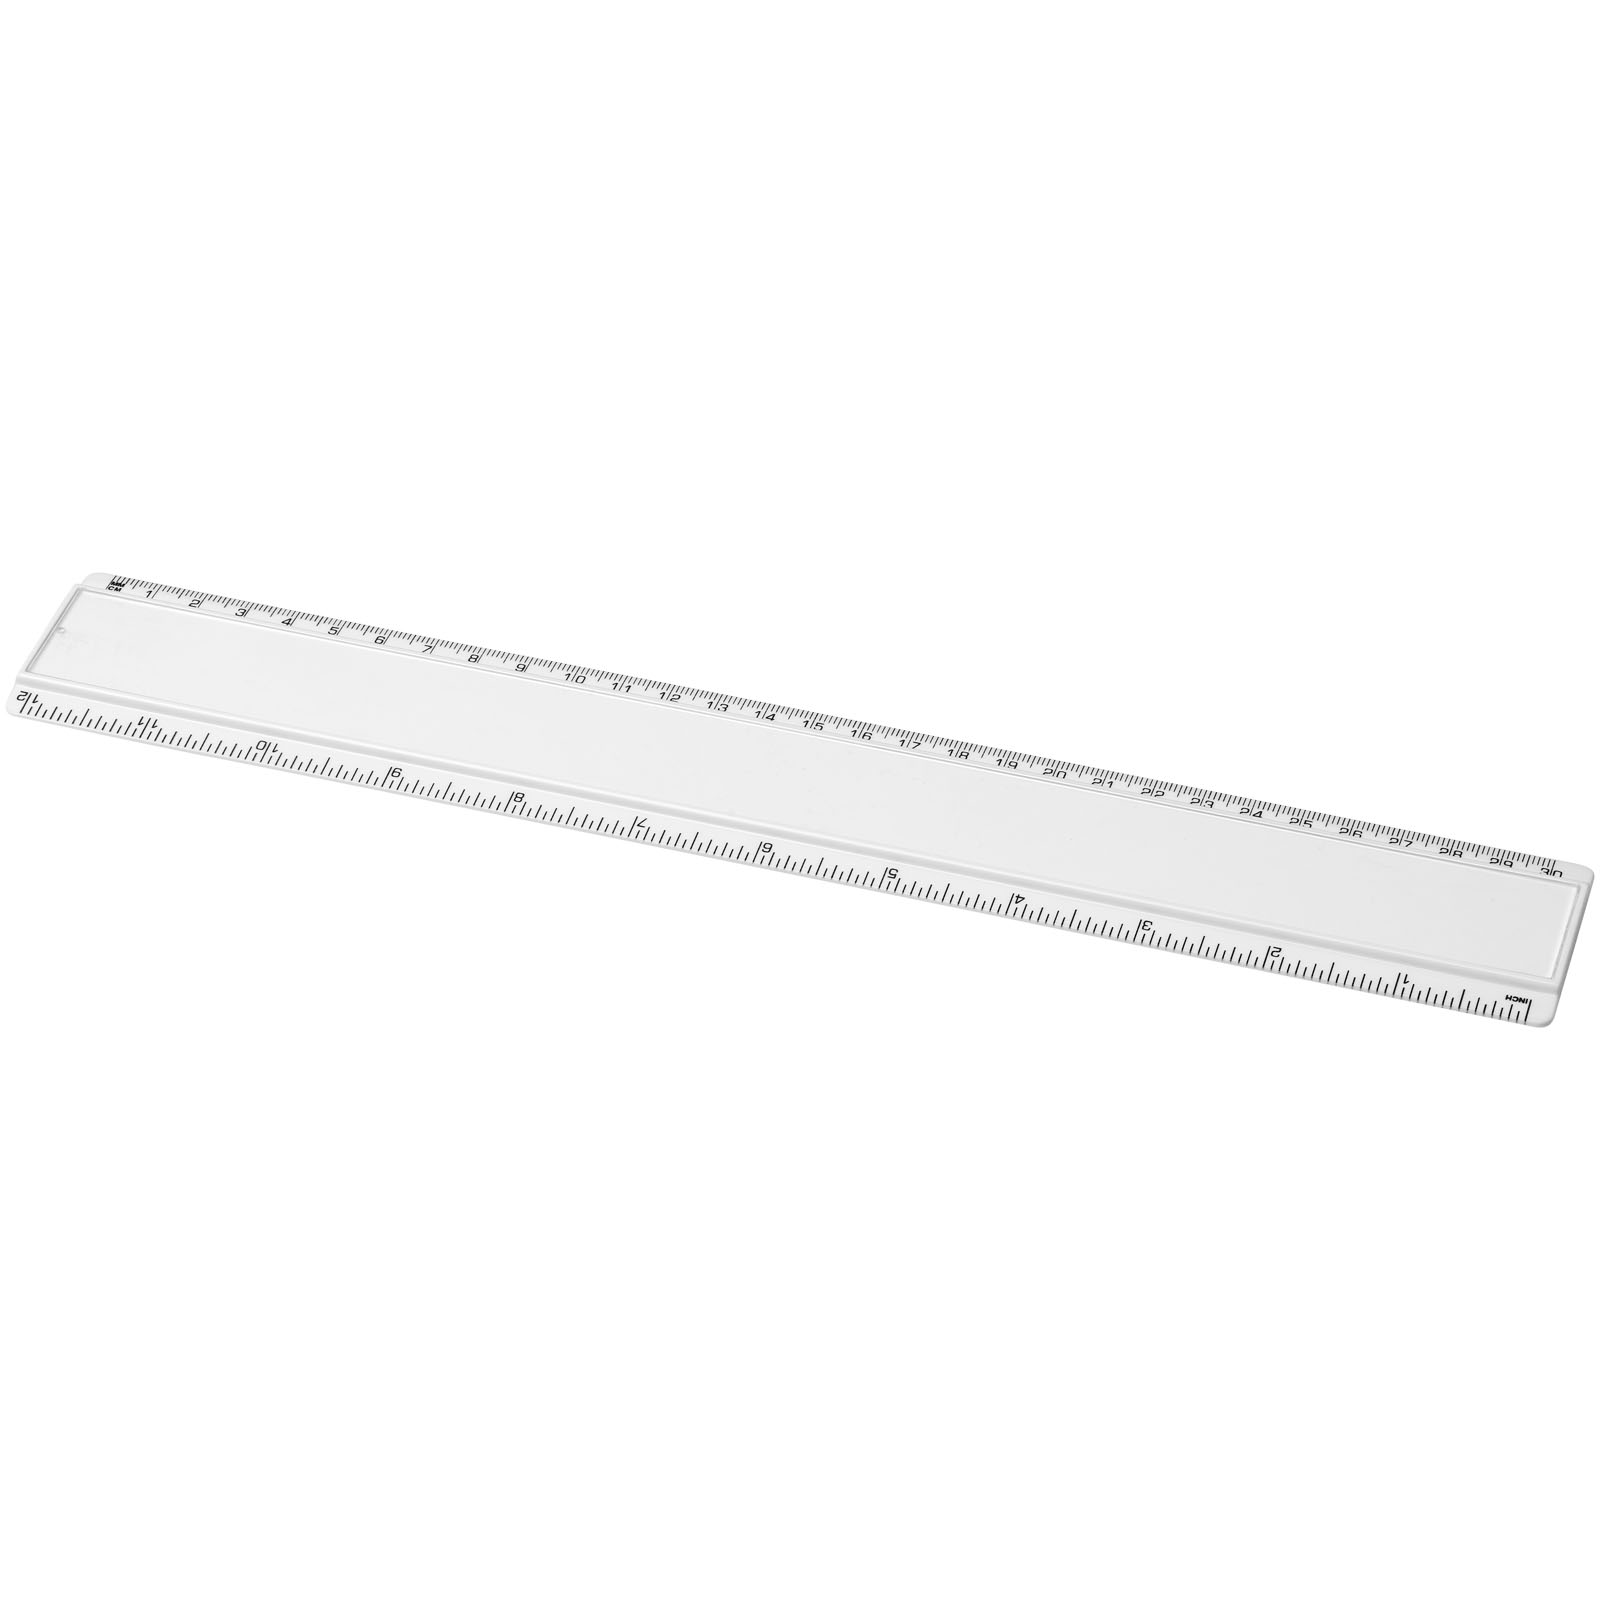 Plastic ruler SPRINGS with paper card for printing, 30 cm